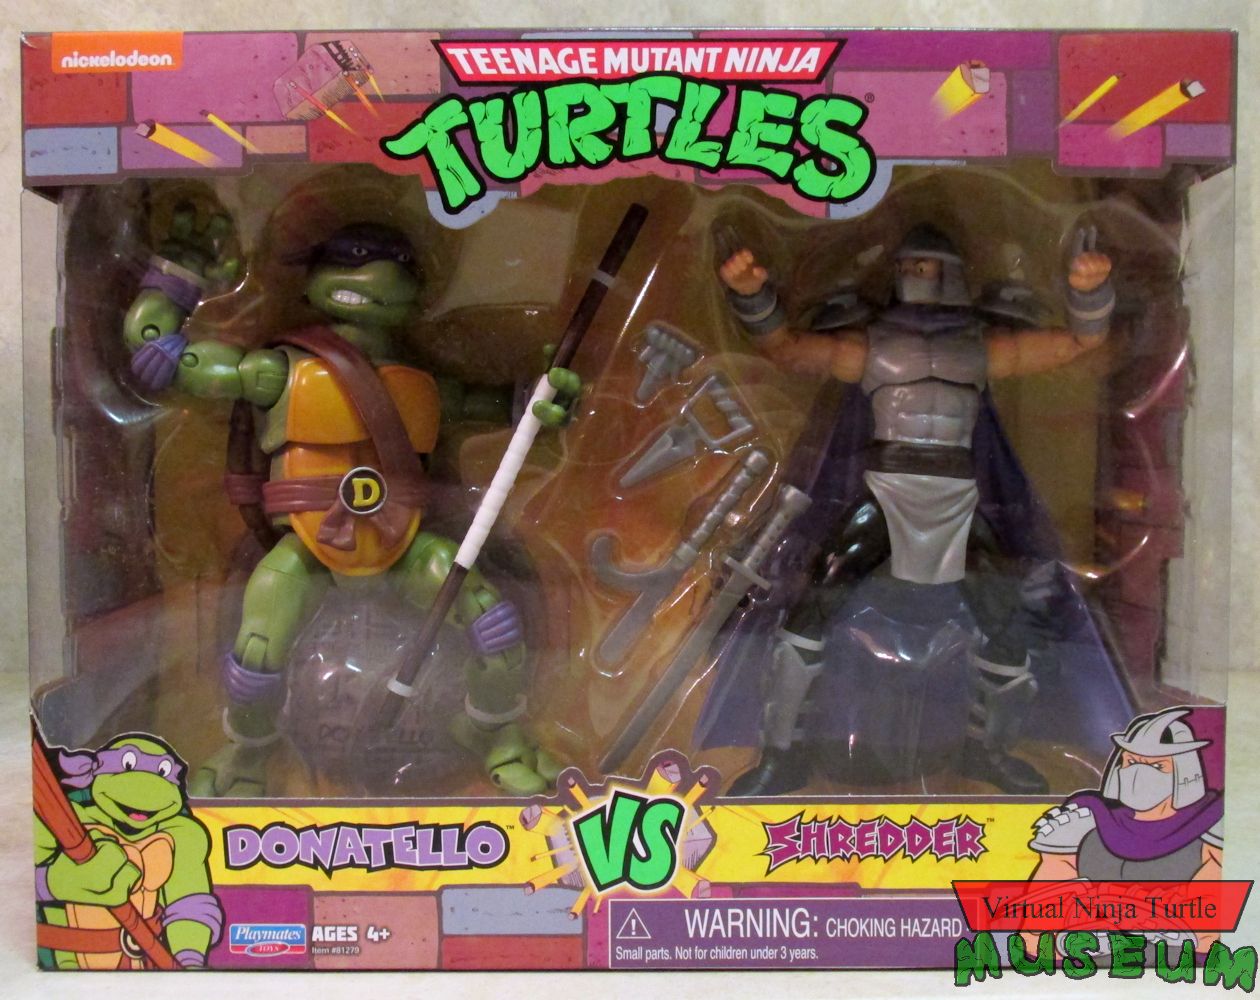 Action Figure Review: The Shredder from Ninja Turtles by Playmates